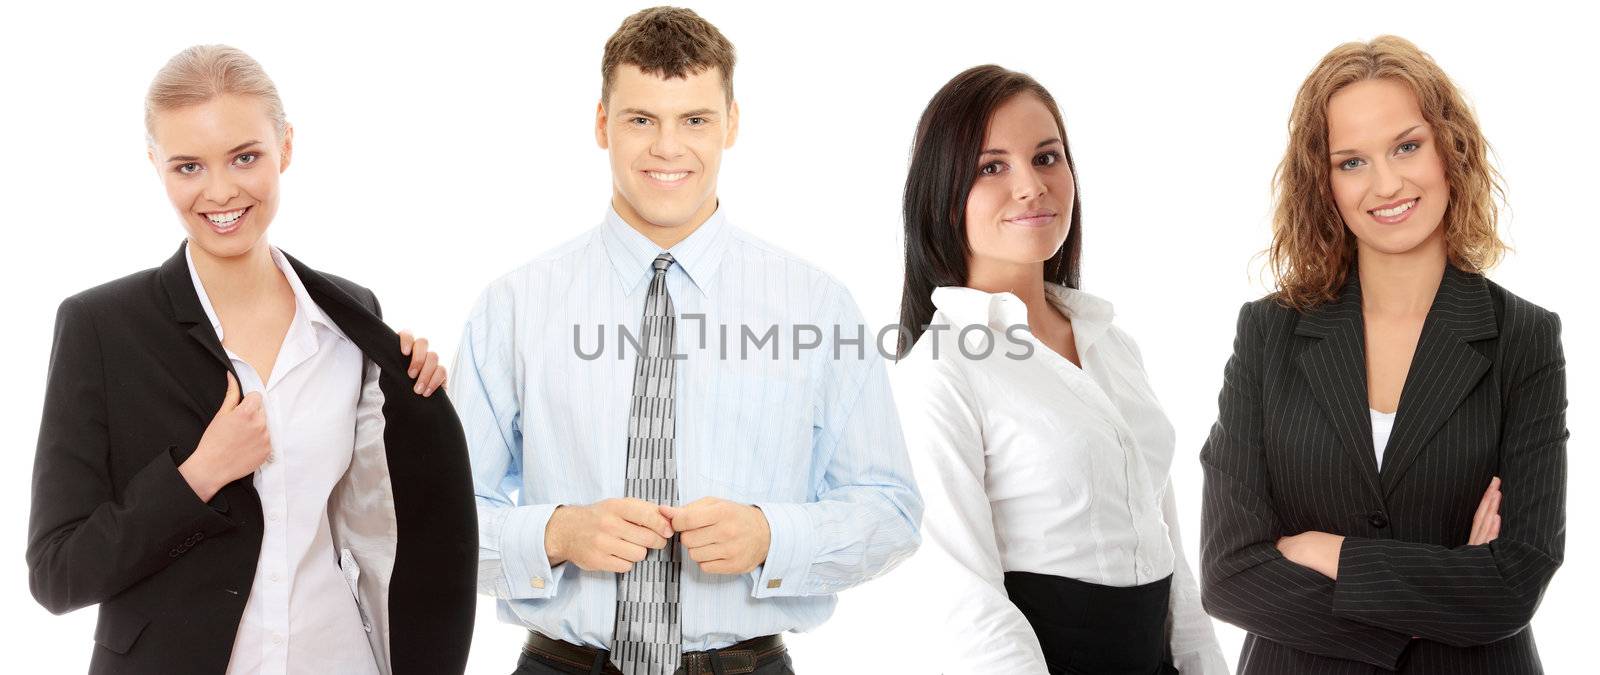 Group of successful business people isolated on white.